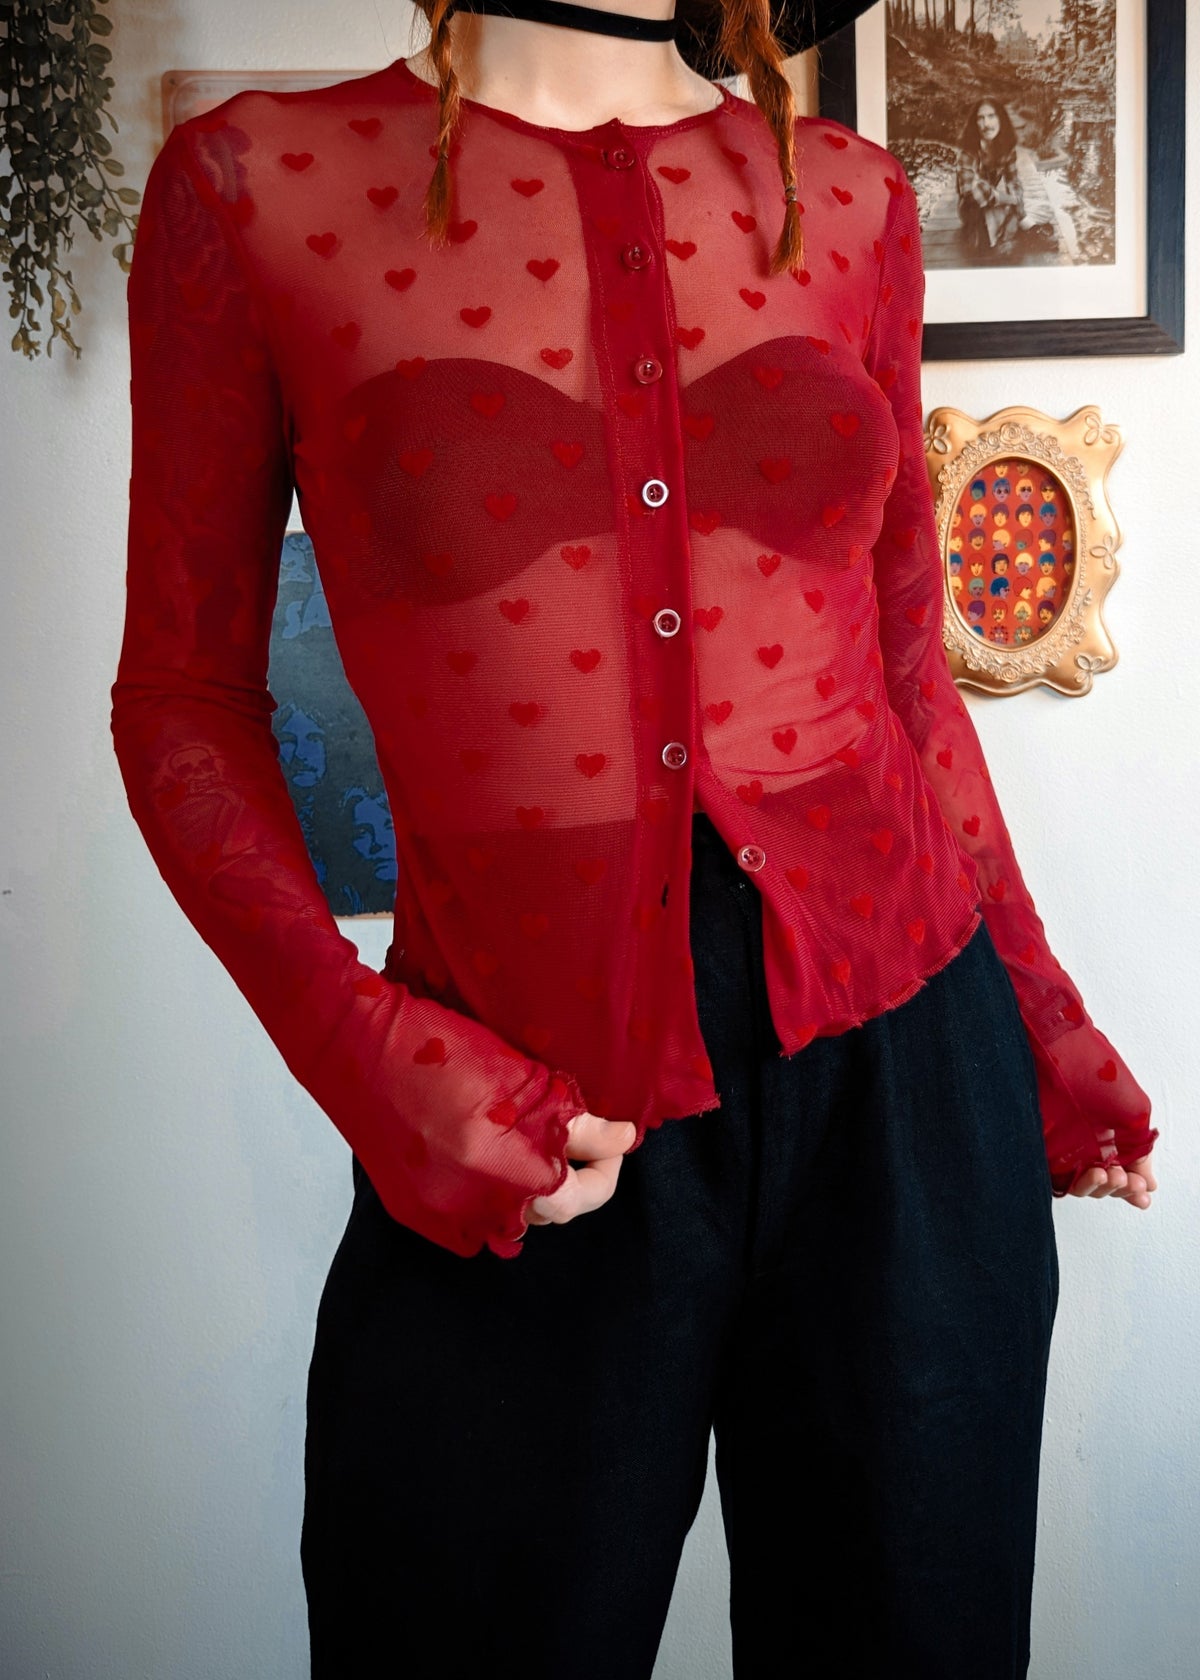 90s inspired Valentine deep red slinky mesh button front top with red flocked velvet hearts all over. Lettuce trim at cuffs and hem. By Motel Rocks